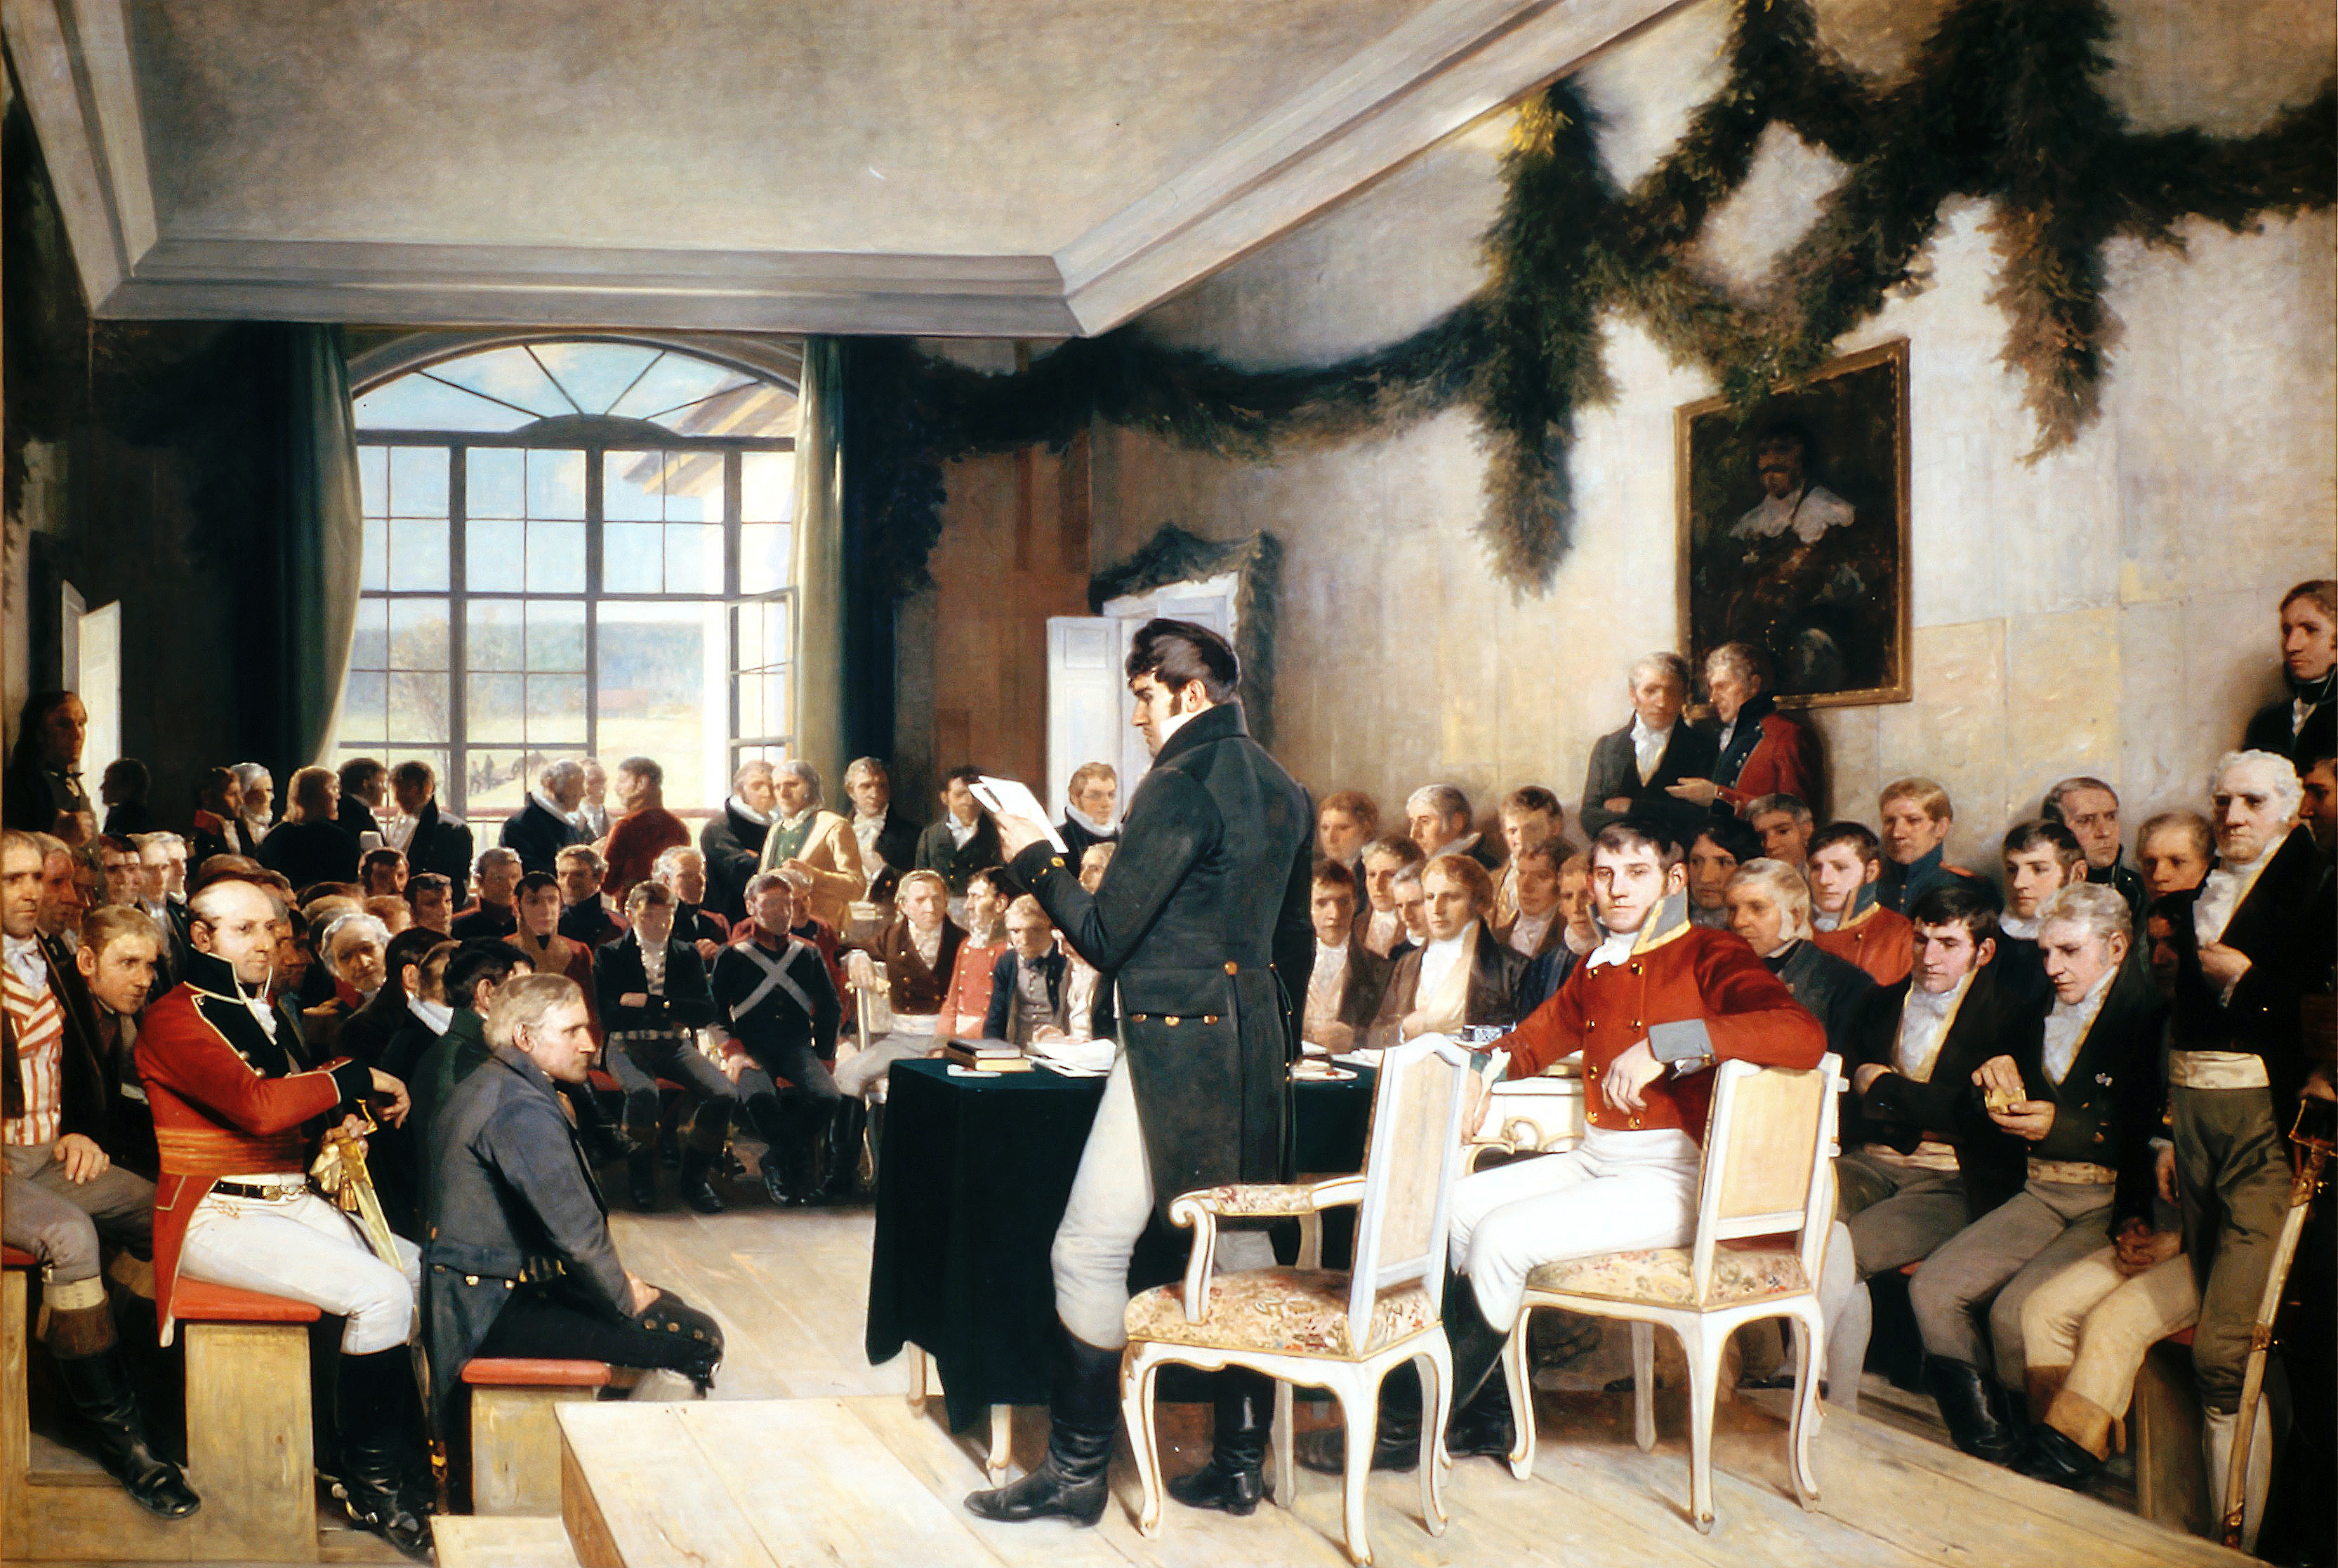 The National Assembly in Eidsvoll in 1814 - a painting by Oscar Arnold Wergeland